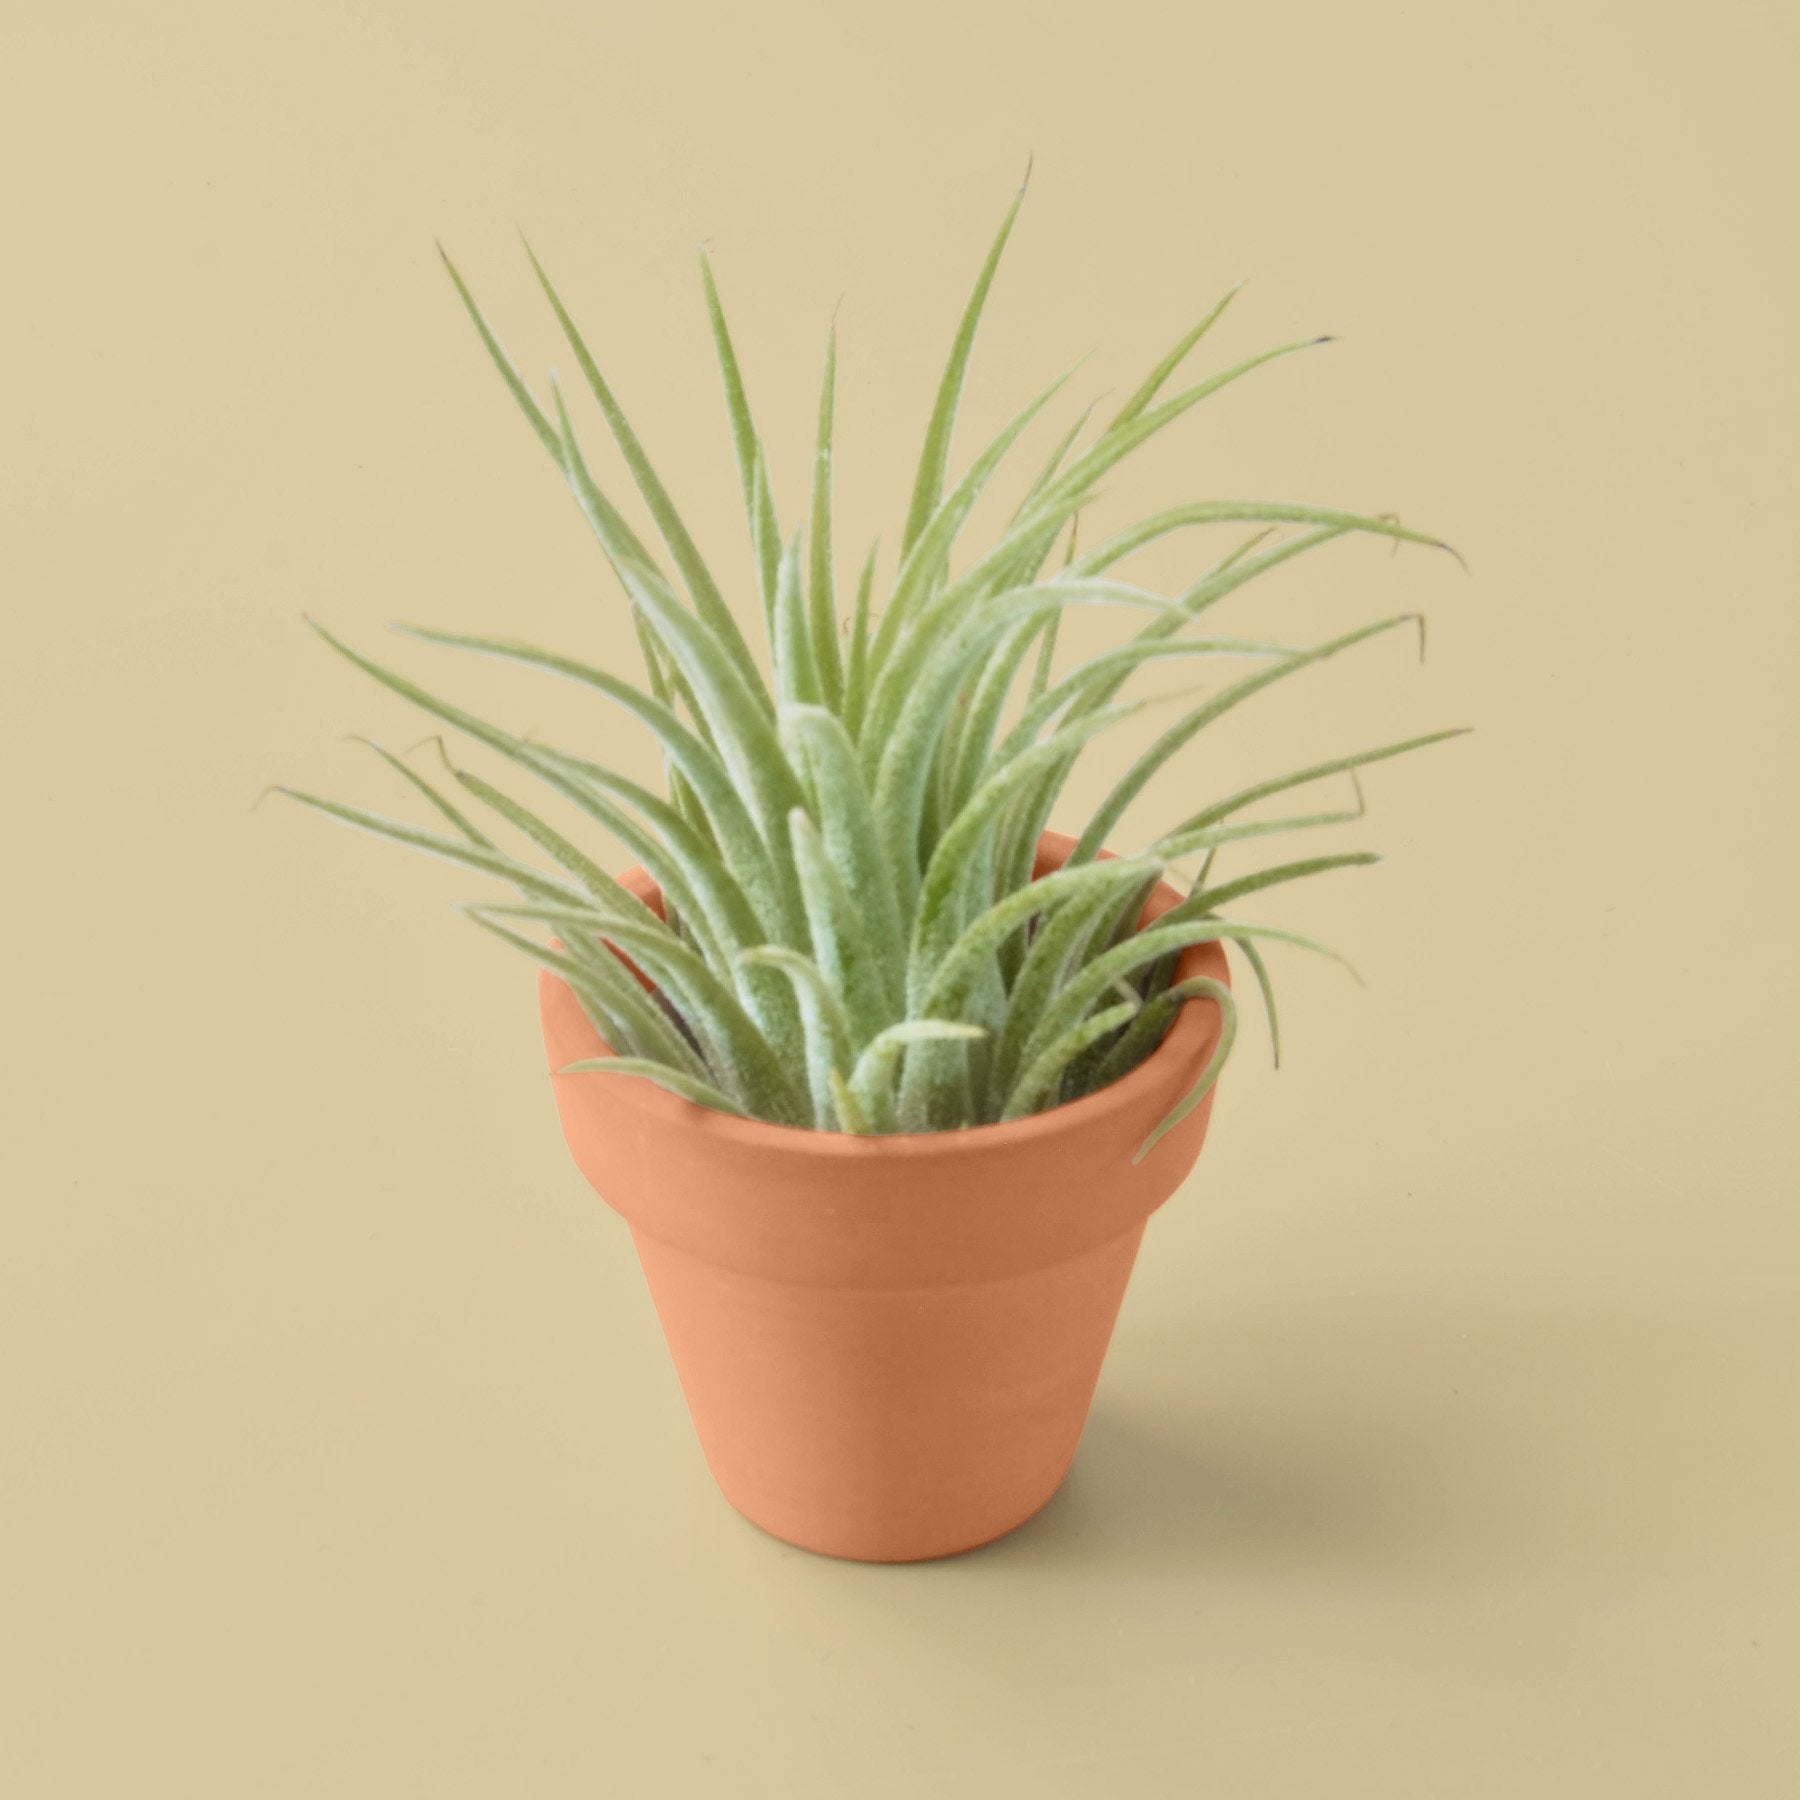 A small air plant in a pot on a beige background purchased from one of the top plant nurseries near me.